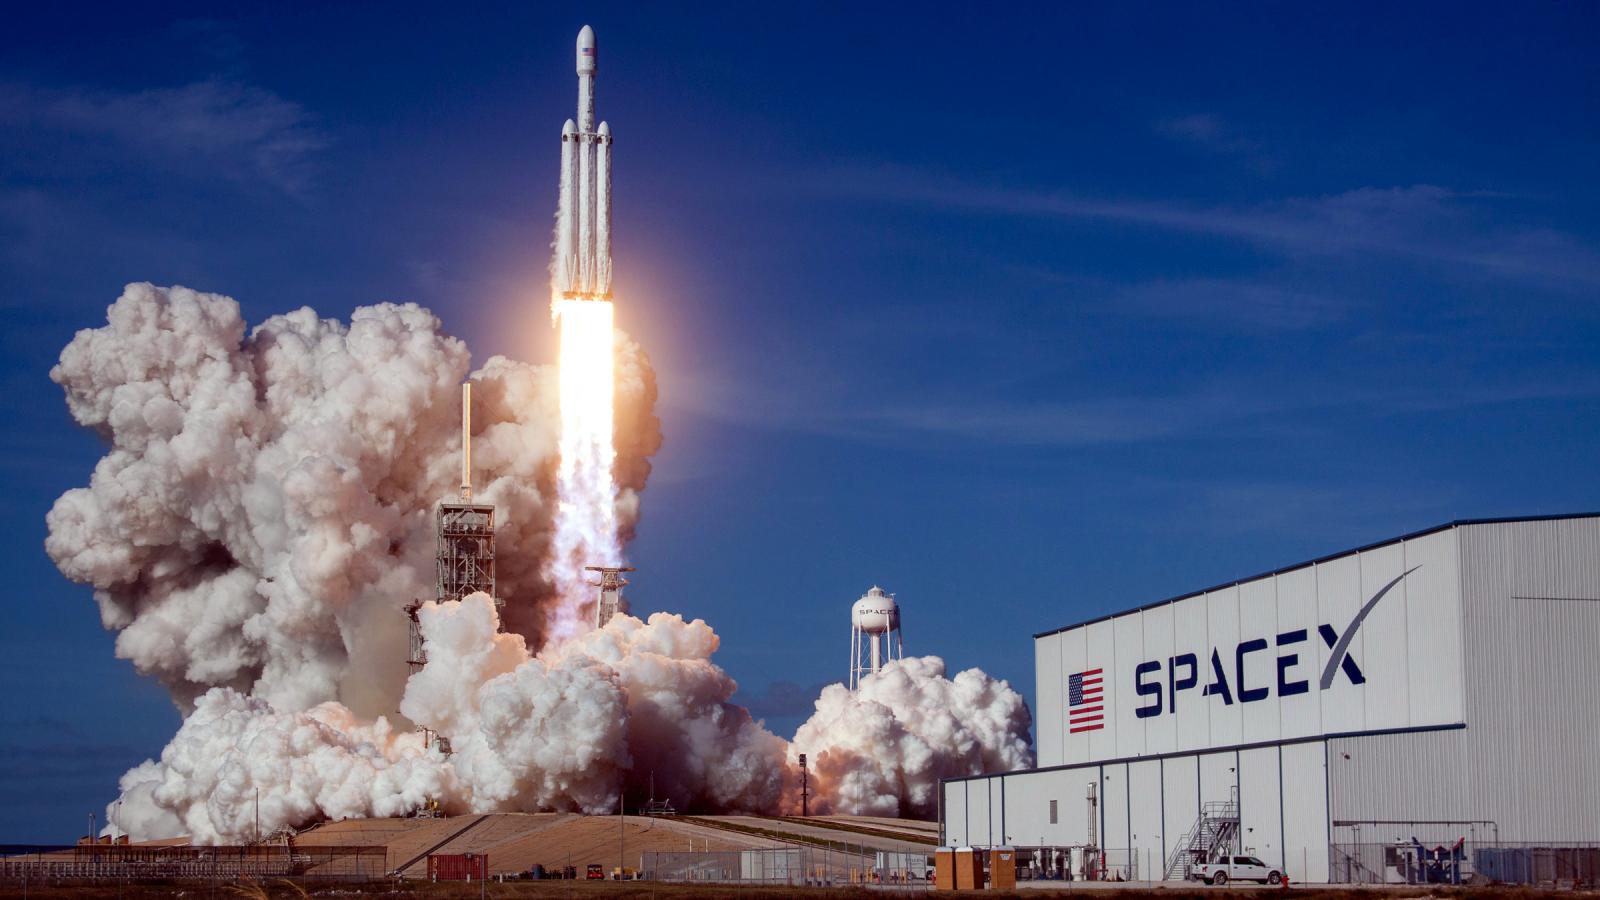 SpaxeX Falcon launching in Florida. Photo; SpaceX